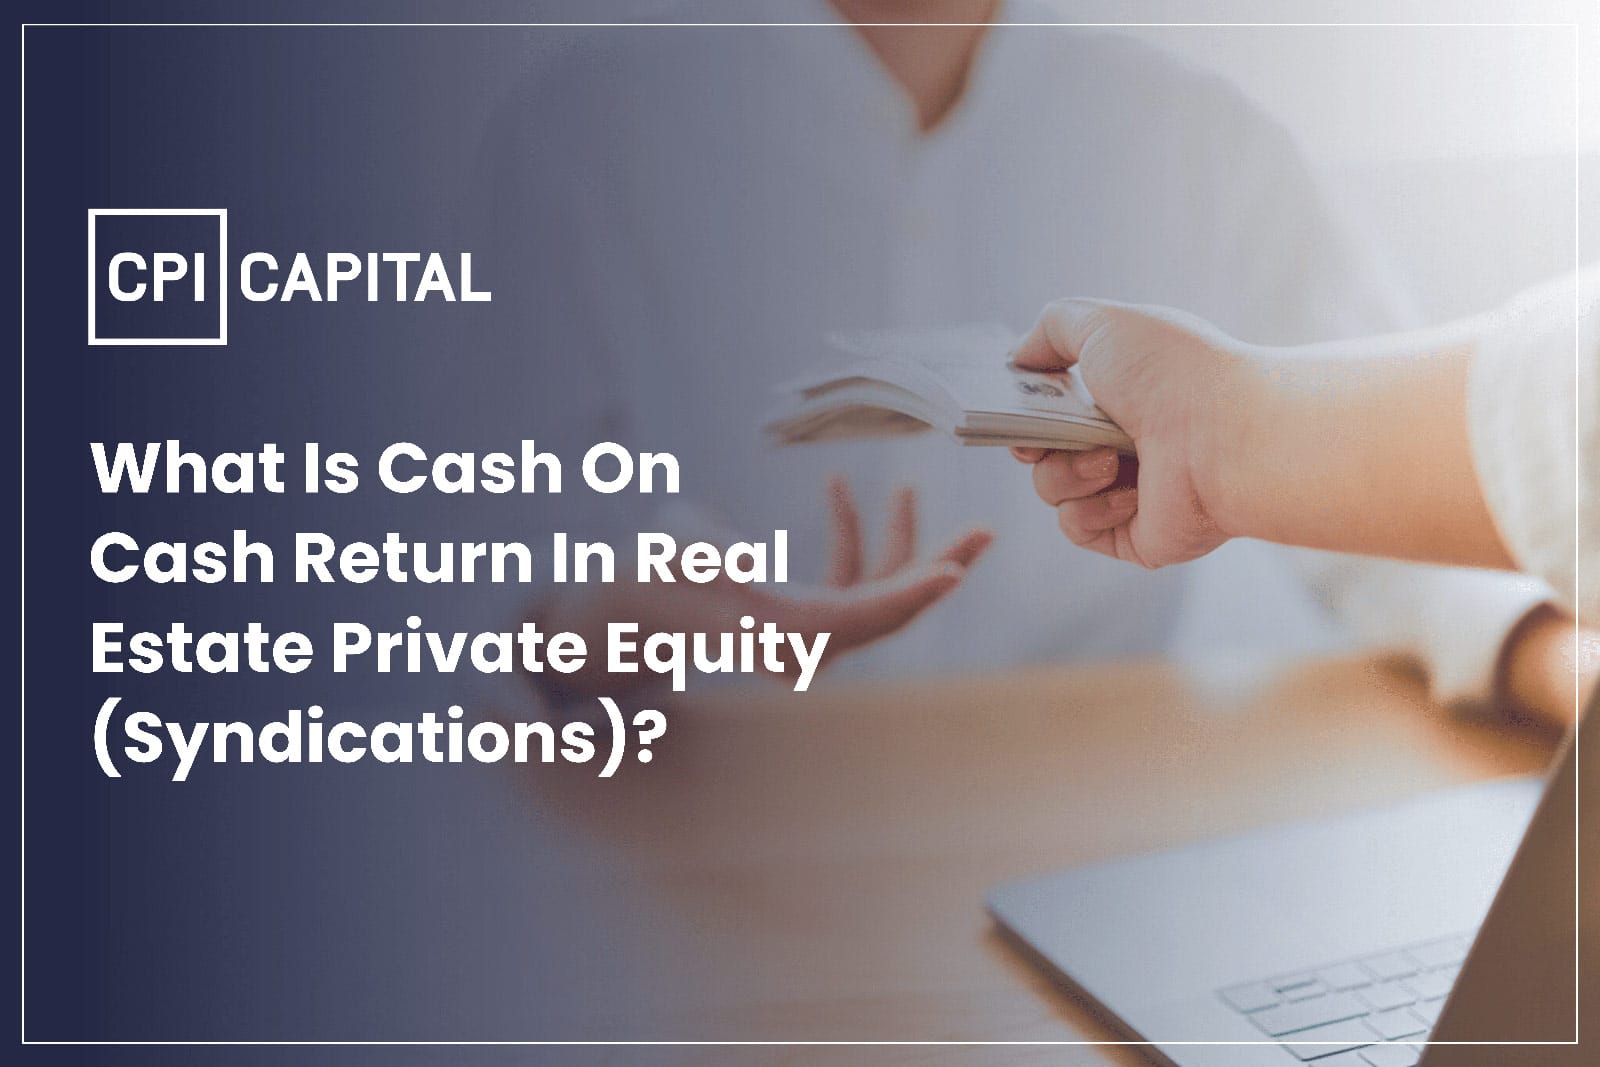 What is a Cash-on-Cash Return in Real Estate Private Equity (Syndications)?